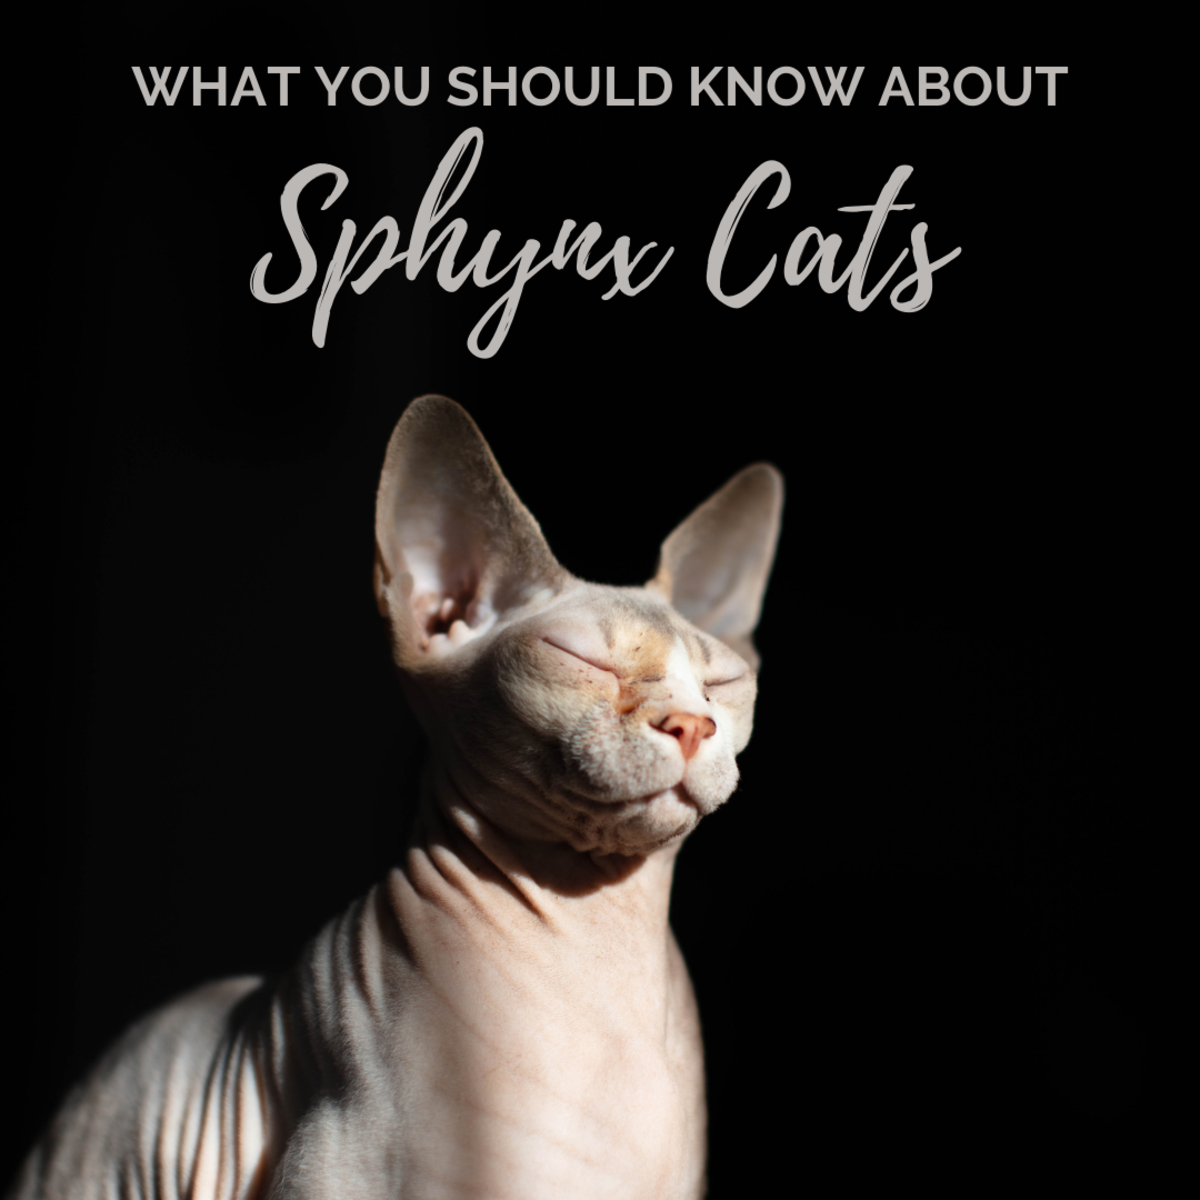 II. The Nature of Sphynx Cats